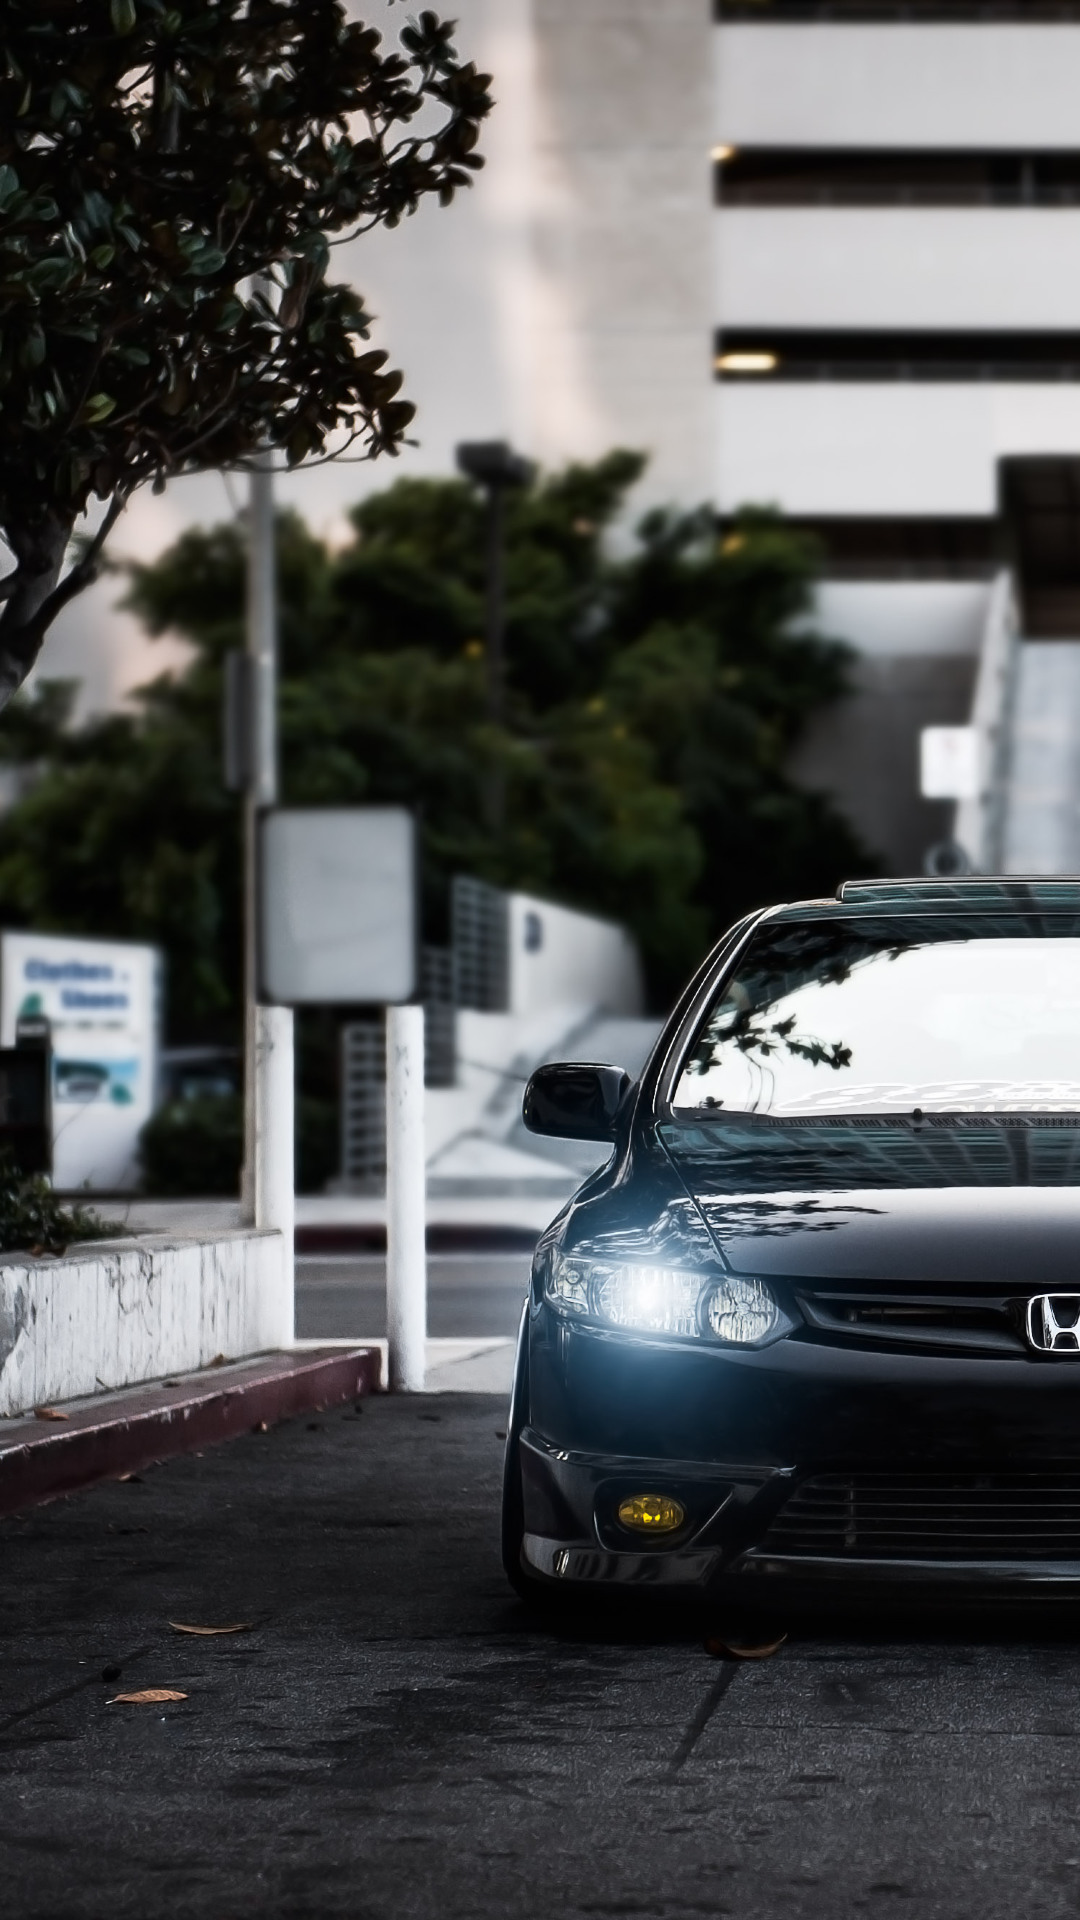 Honda Civic Si Wallpaper - Honda Civic Si Wallpaper Iphone , HD Wallpaper & Backgrounds